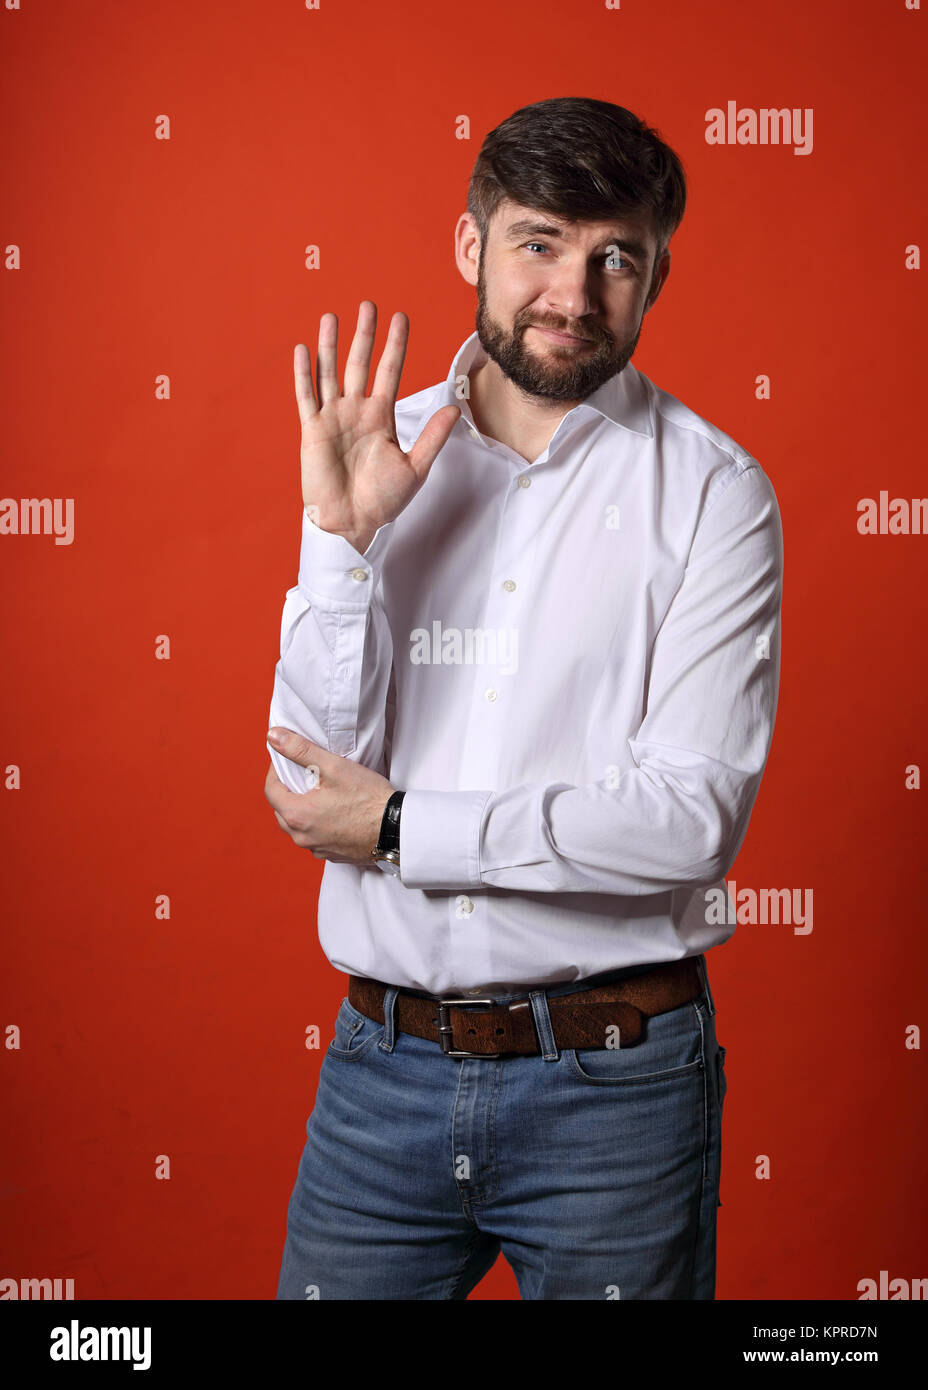 Happy smiling bearded businessman waving the hand and saying hello in fashion white style shirt on bright orange background. Closeup portrait Stock Photo